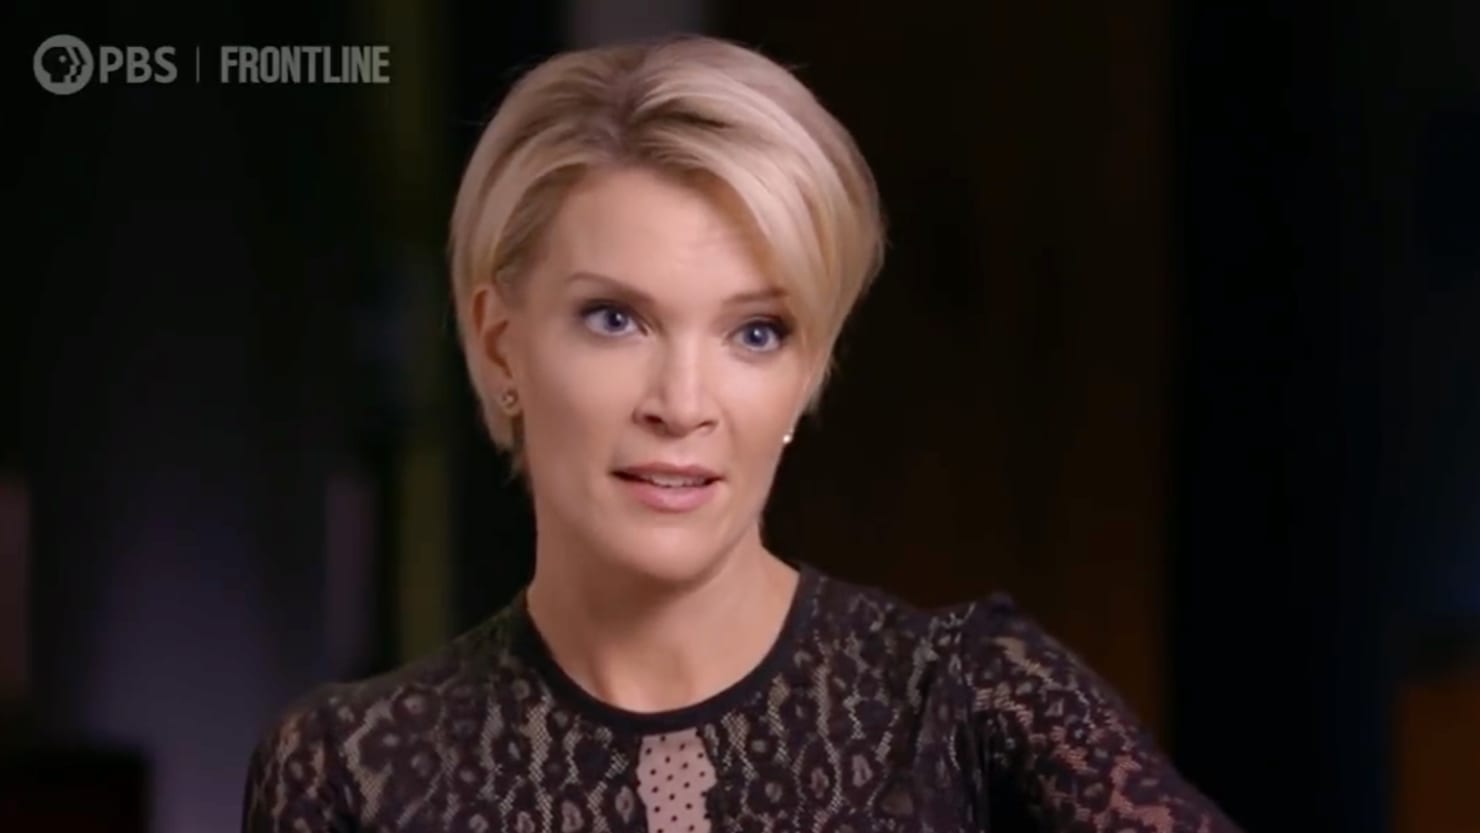 Megyn Kelly Calls Out Former NBC Colleagues in New ‘Frontline’ Interview